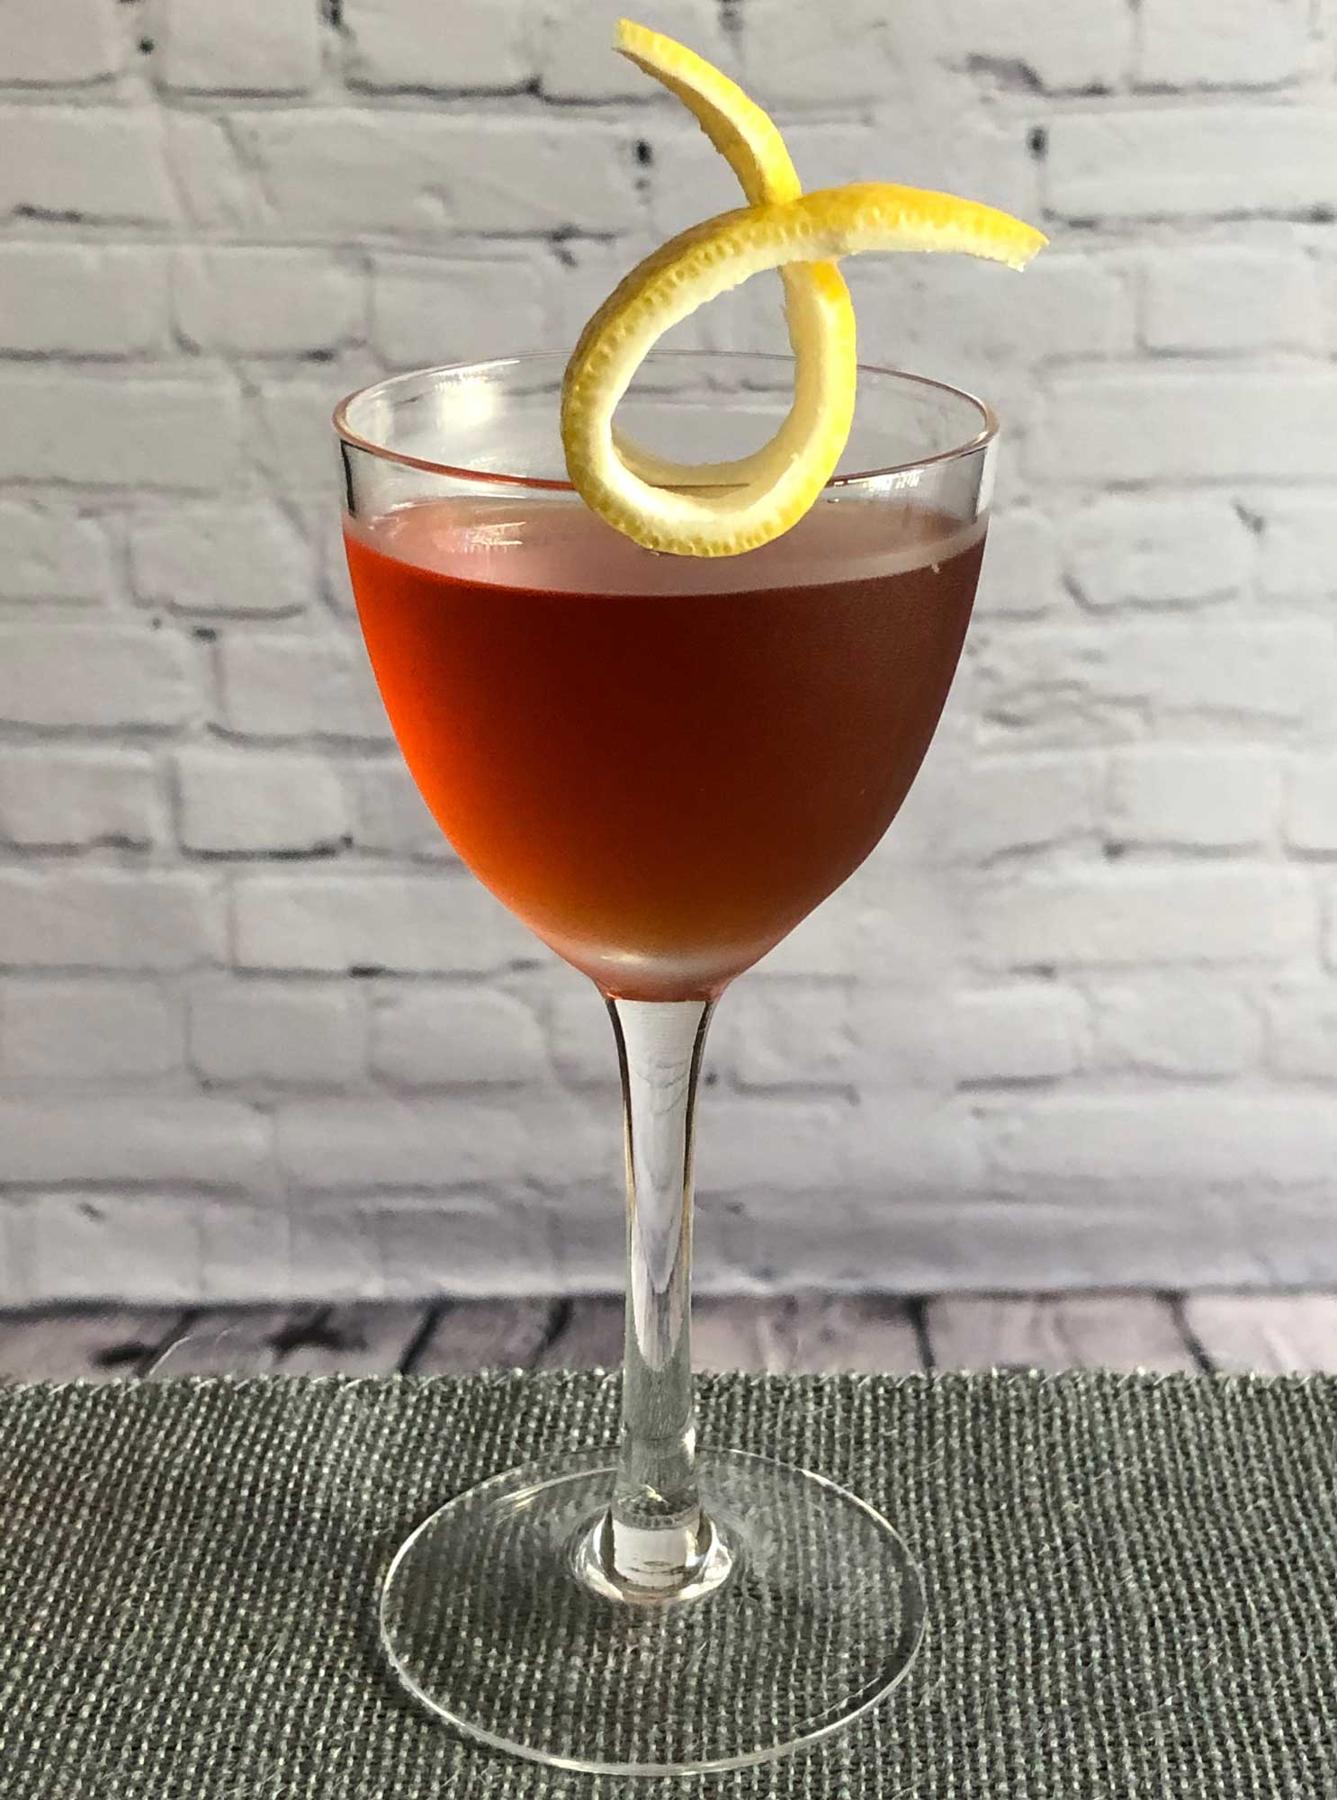 An example of the Moll Cocktail, the mixed drink (drink), by Savoy Cocktail Book, featuring Hayman’s Sloe Gin, Hayman’s London Dry Gin, Dolin Dry Vermouth de Chambéry, orange bitters, and lemon twist; photo by Lee Edwards